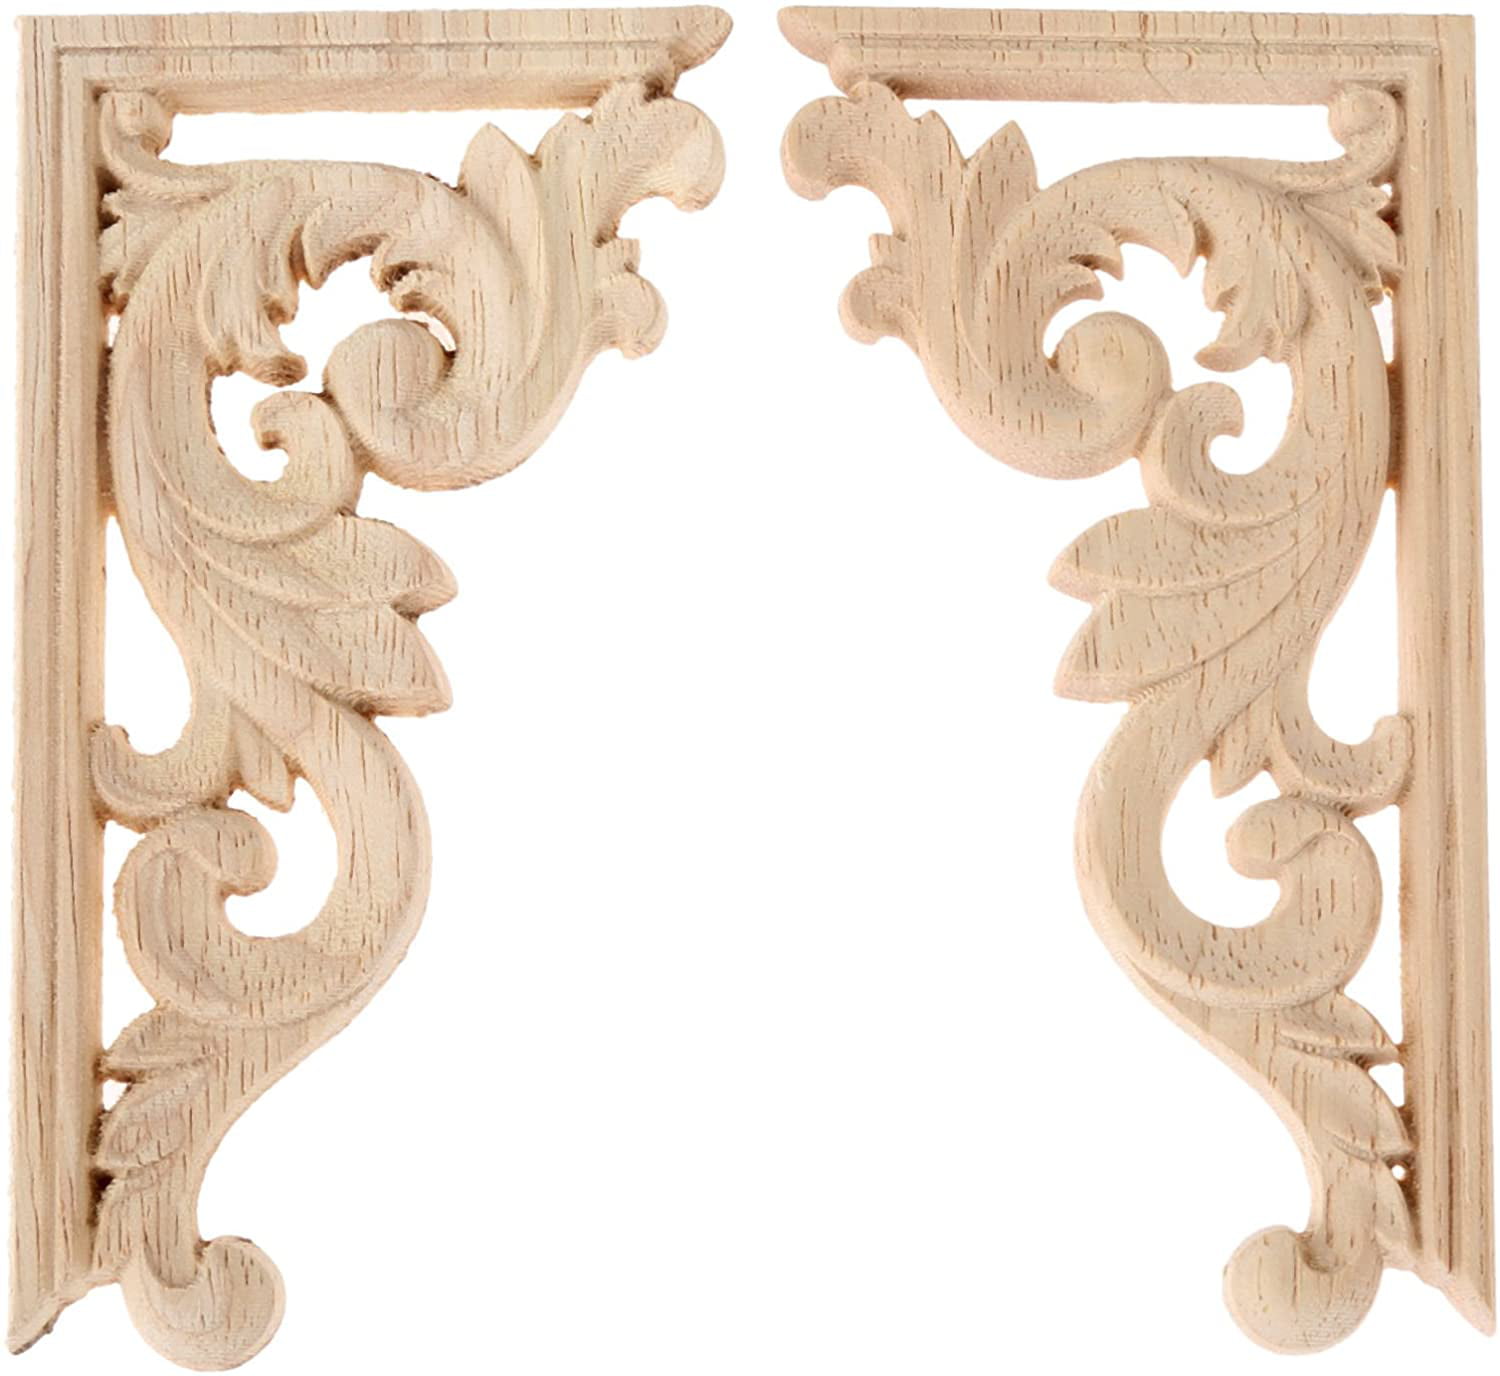 Unpainted Wood Carved Floral Decal Door Cabinet Onlay Applique Frame Decoration 